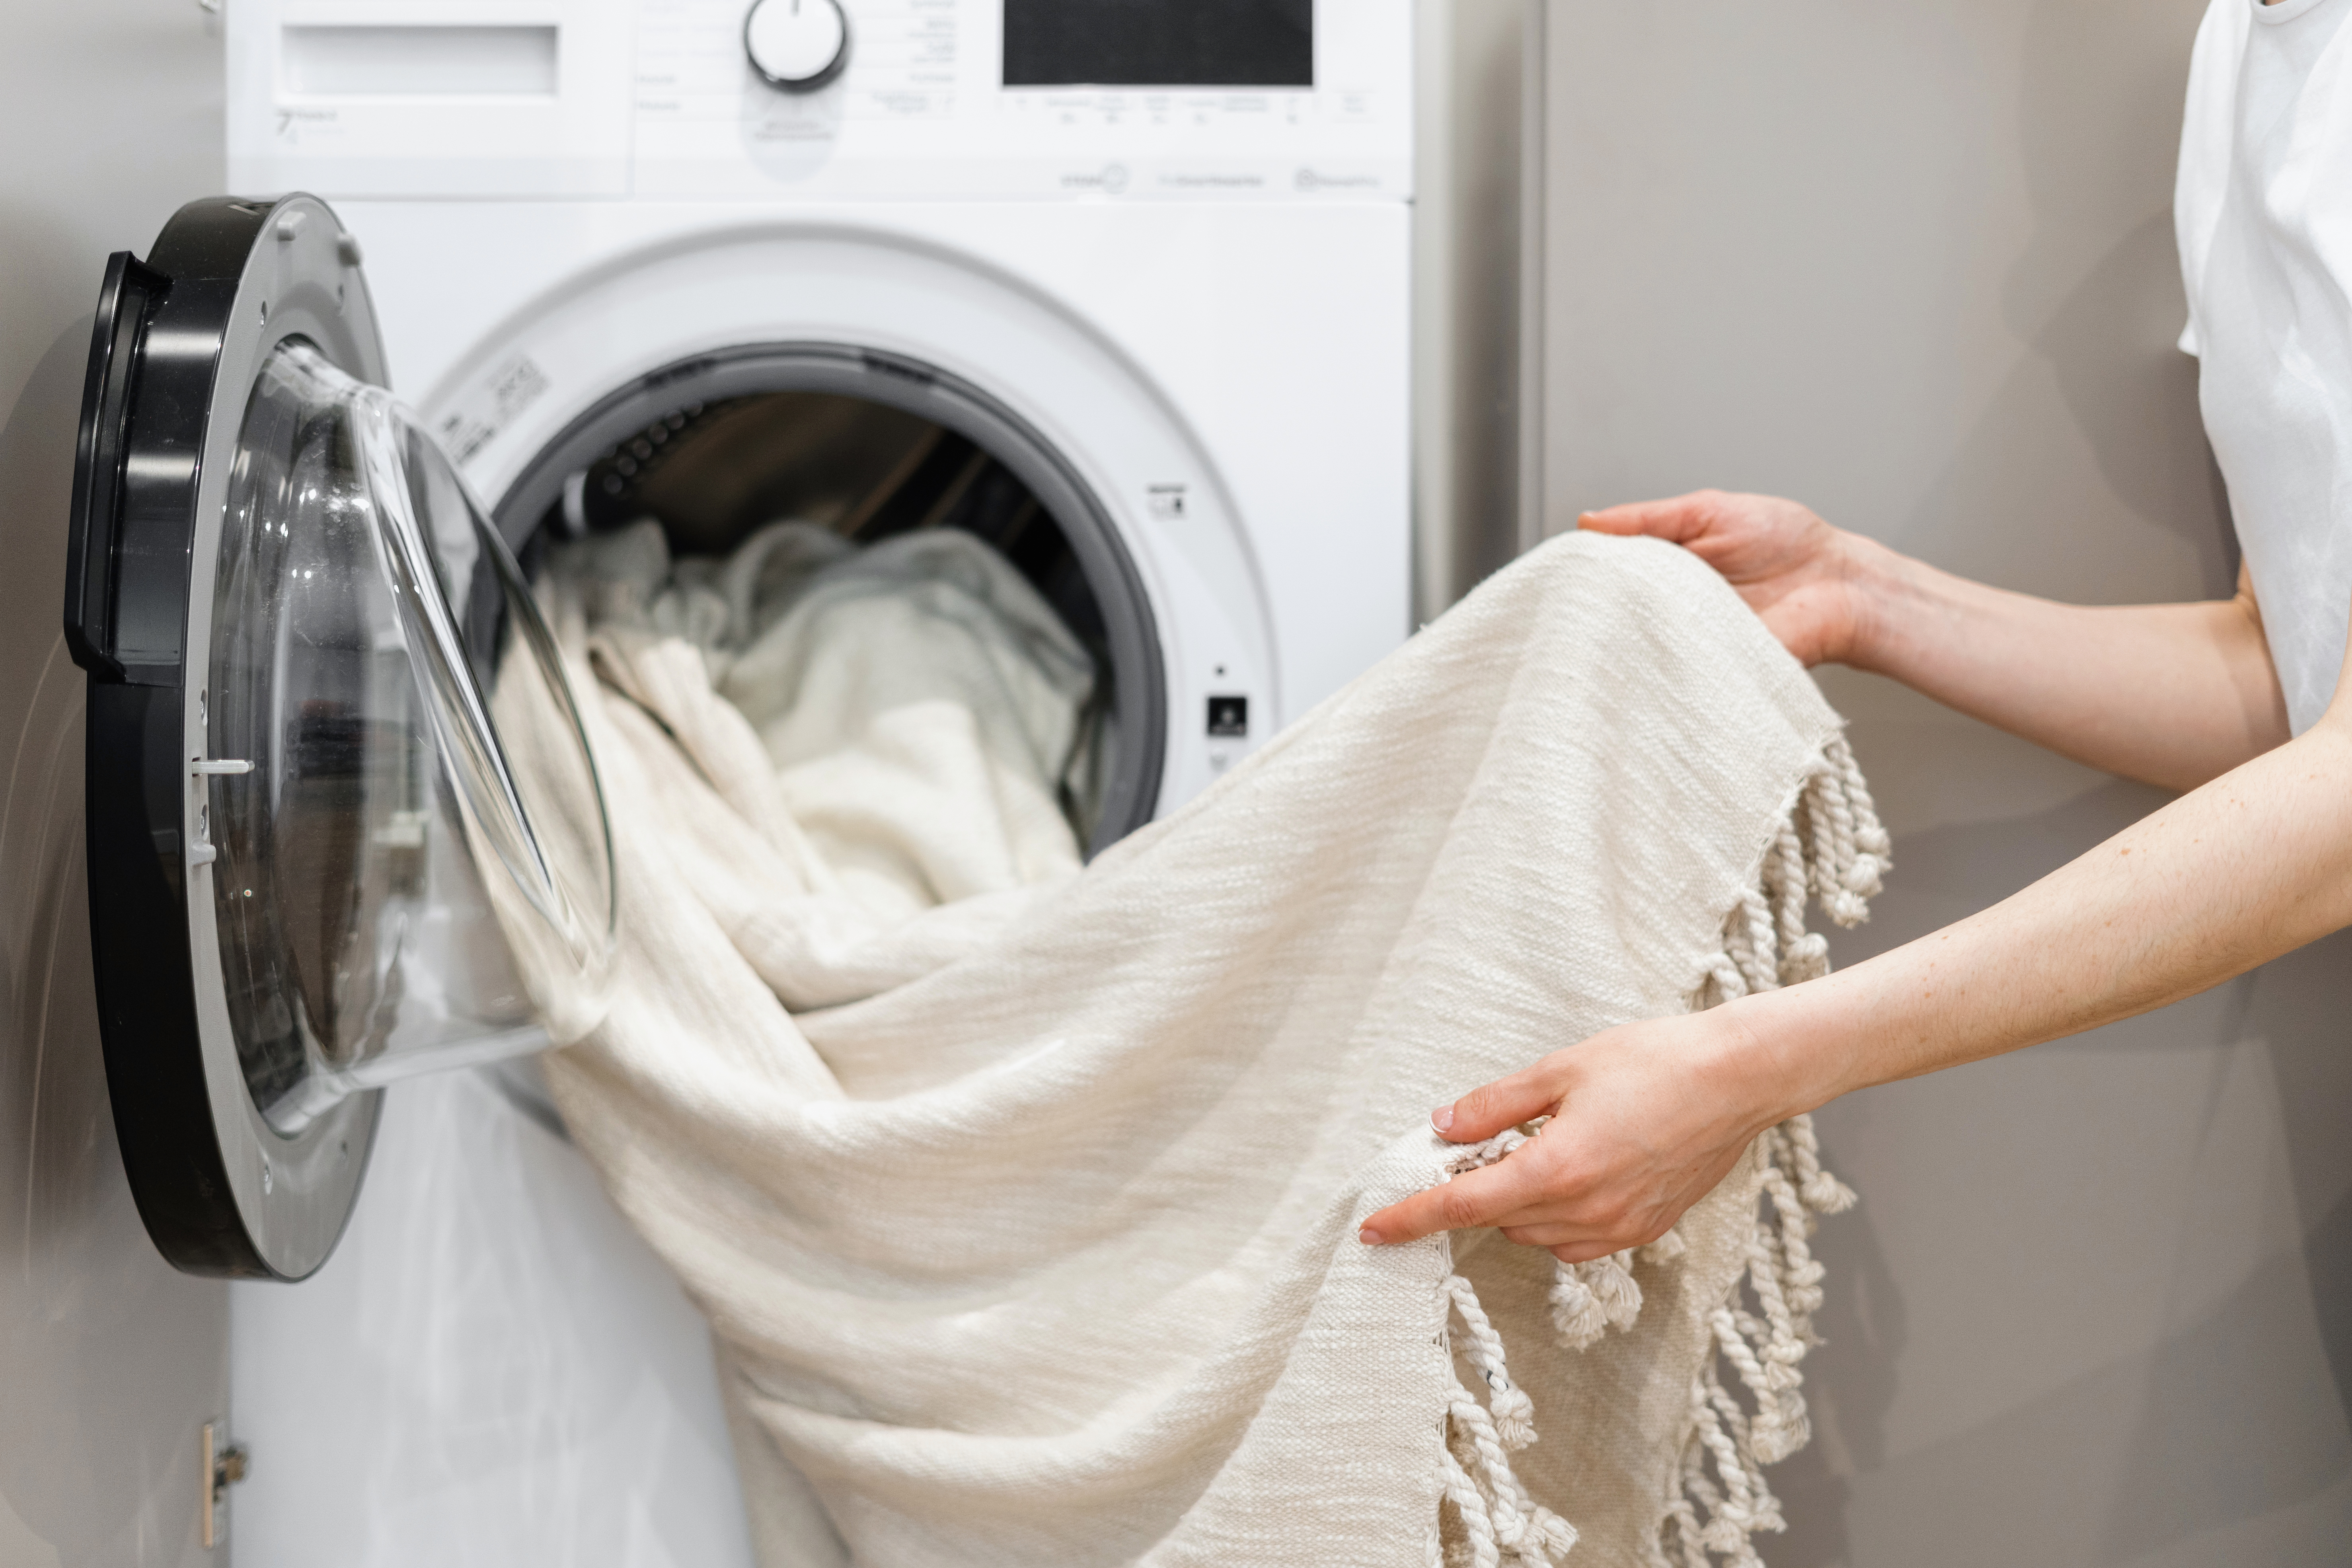 Laundry doesn't have to cost a fortune either, according to appliance experts